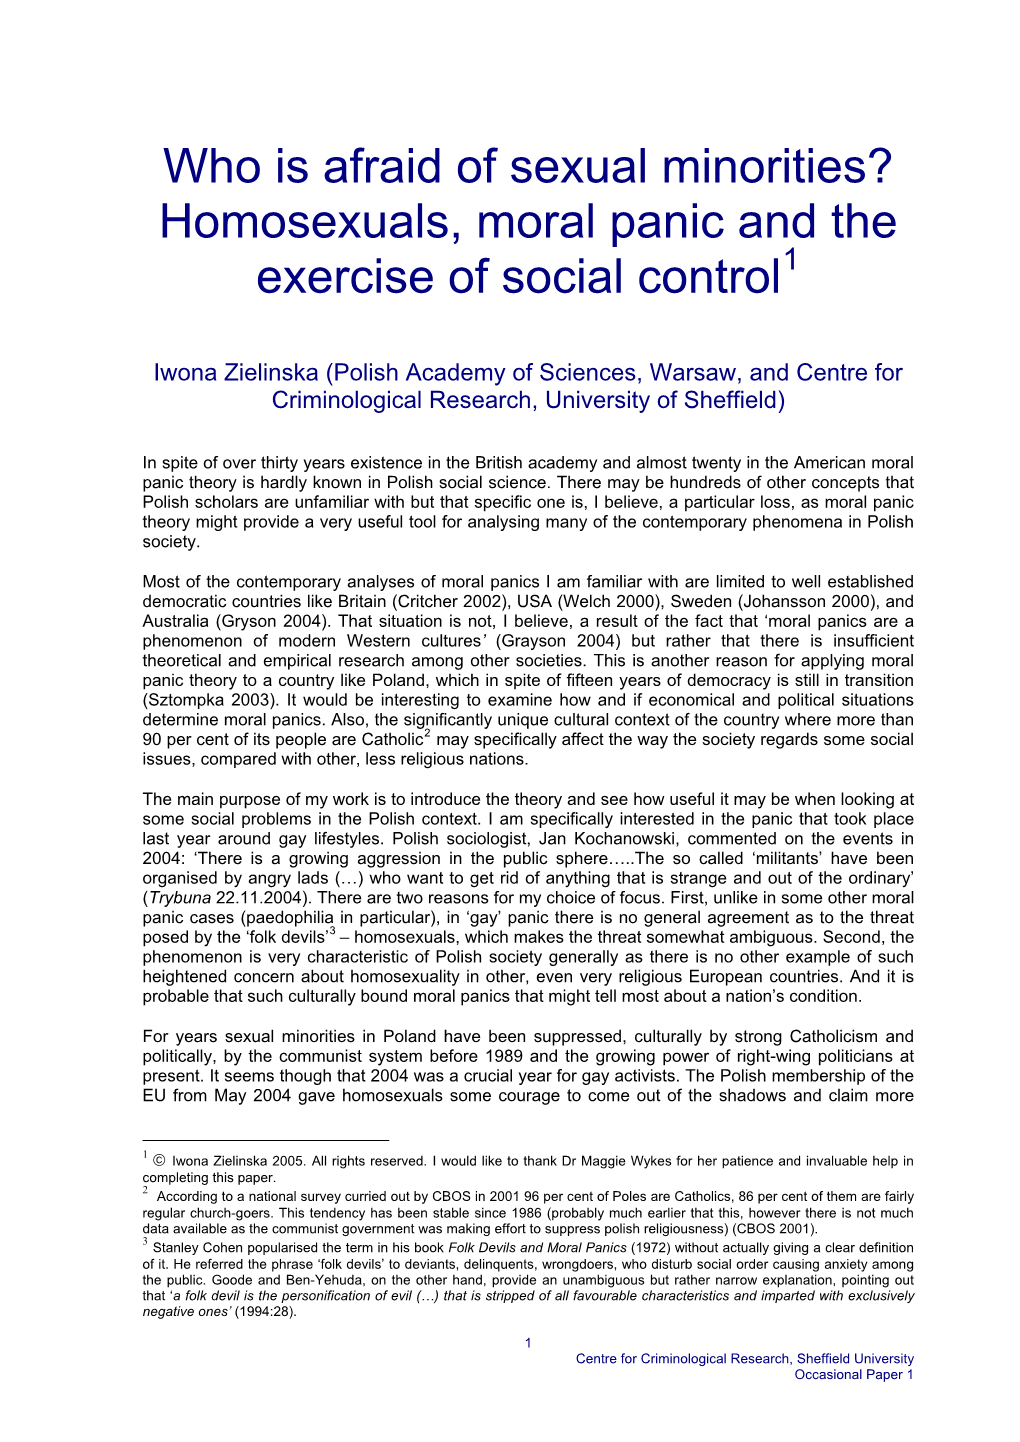 Who Is Afraid of Sexual Minorities? Homosexuals, Moral Panic and the Exercise of Social Control1